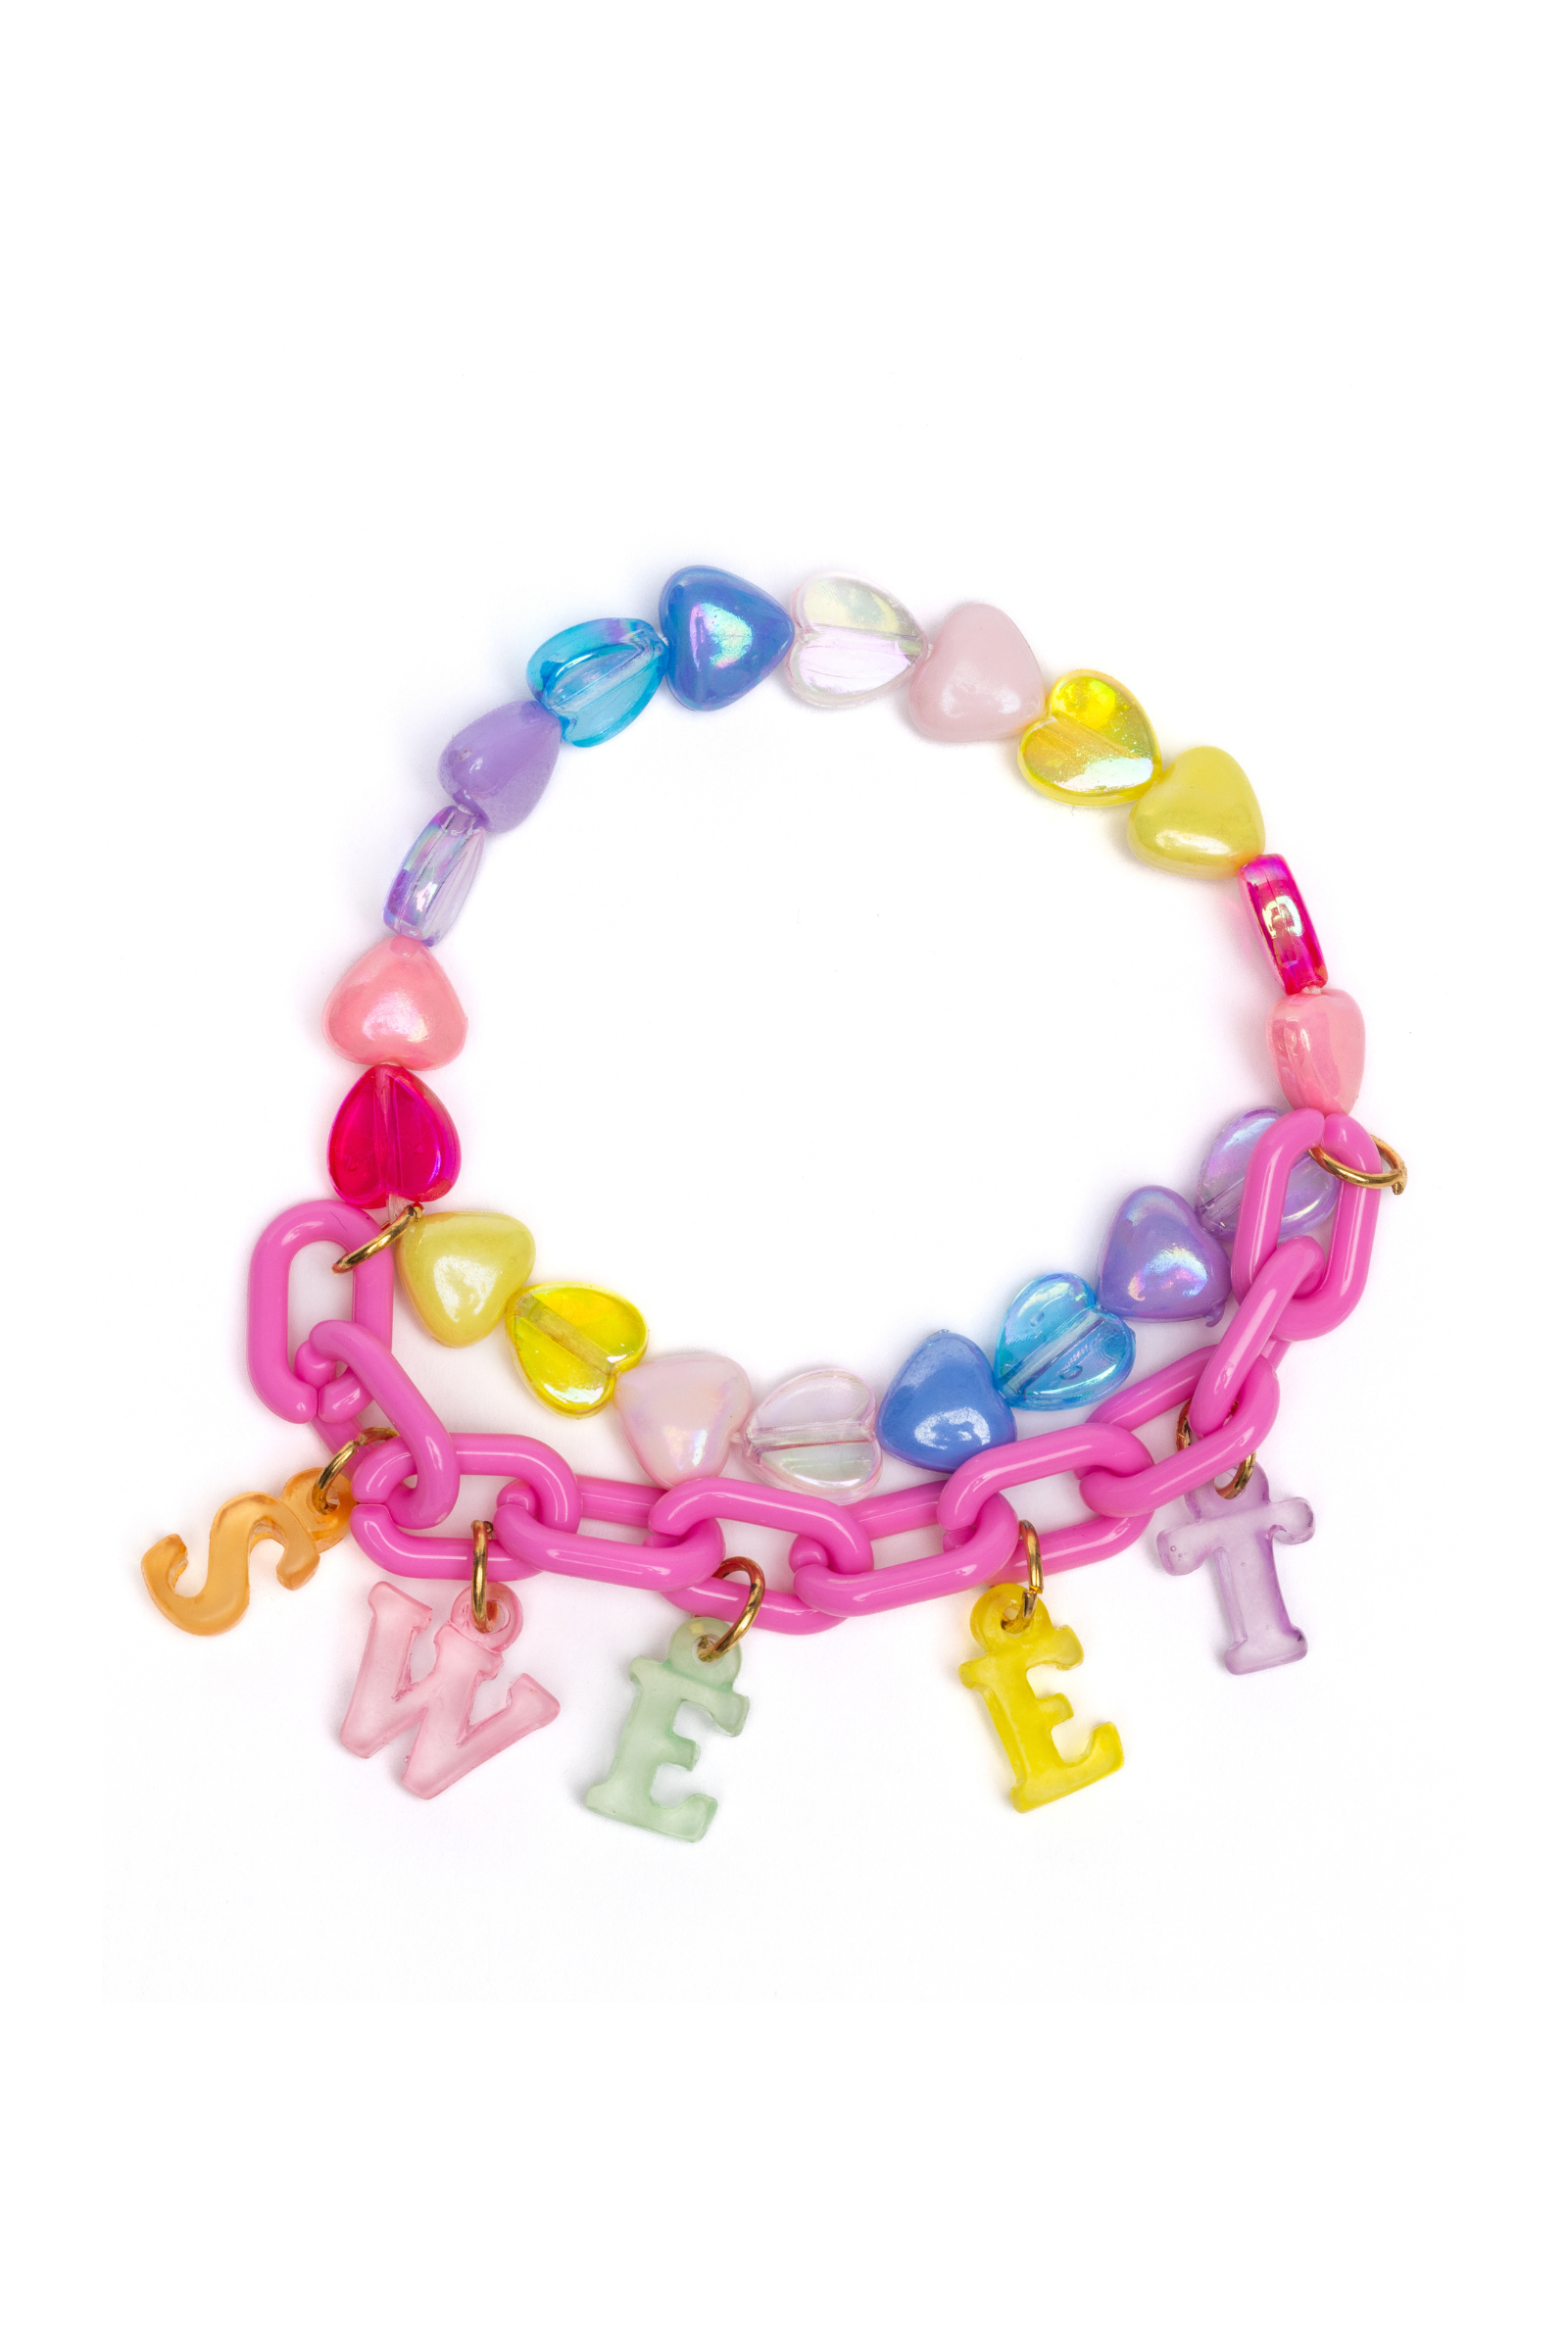 Wholesale 12pcs Cute Summer Candy Color Round Polymer Clay Bead Bracelets